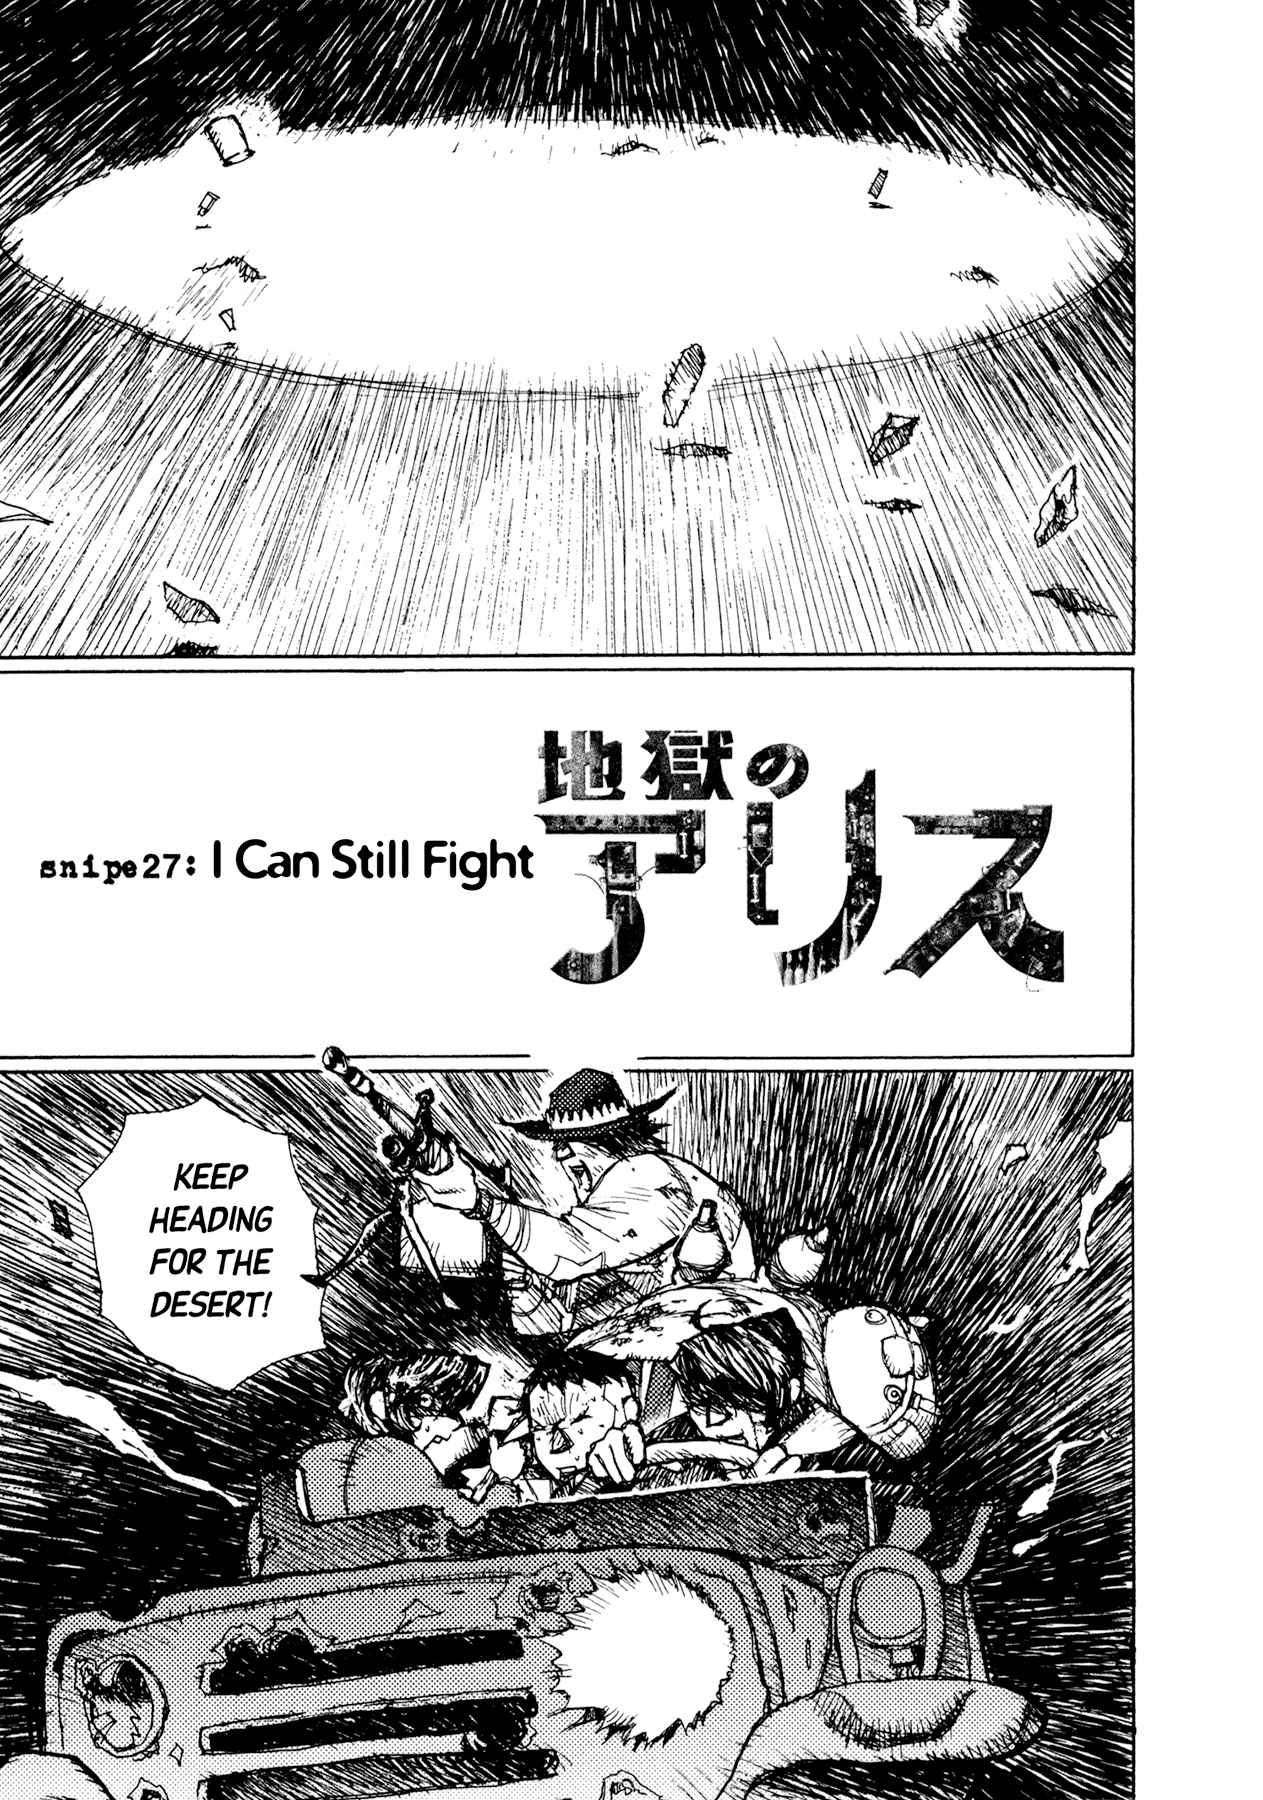 Alice from Hell Vol. 4 Ch. 27 I Can Still Fight